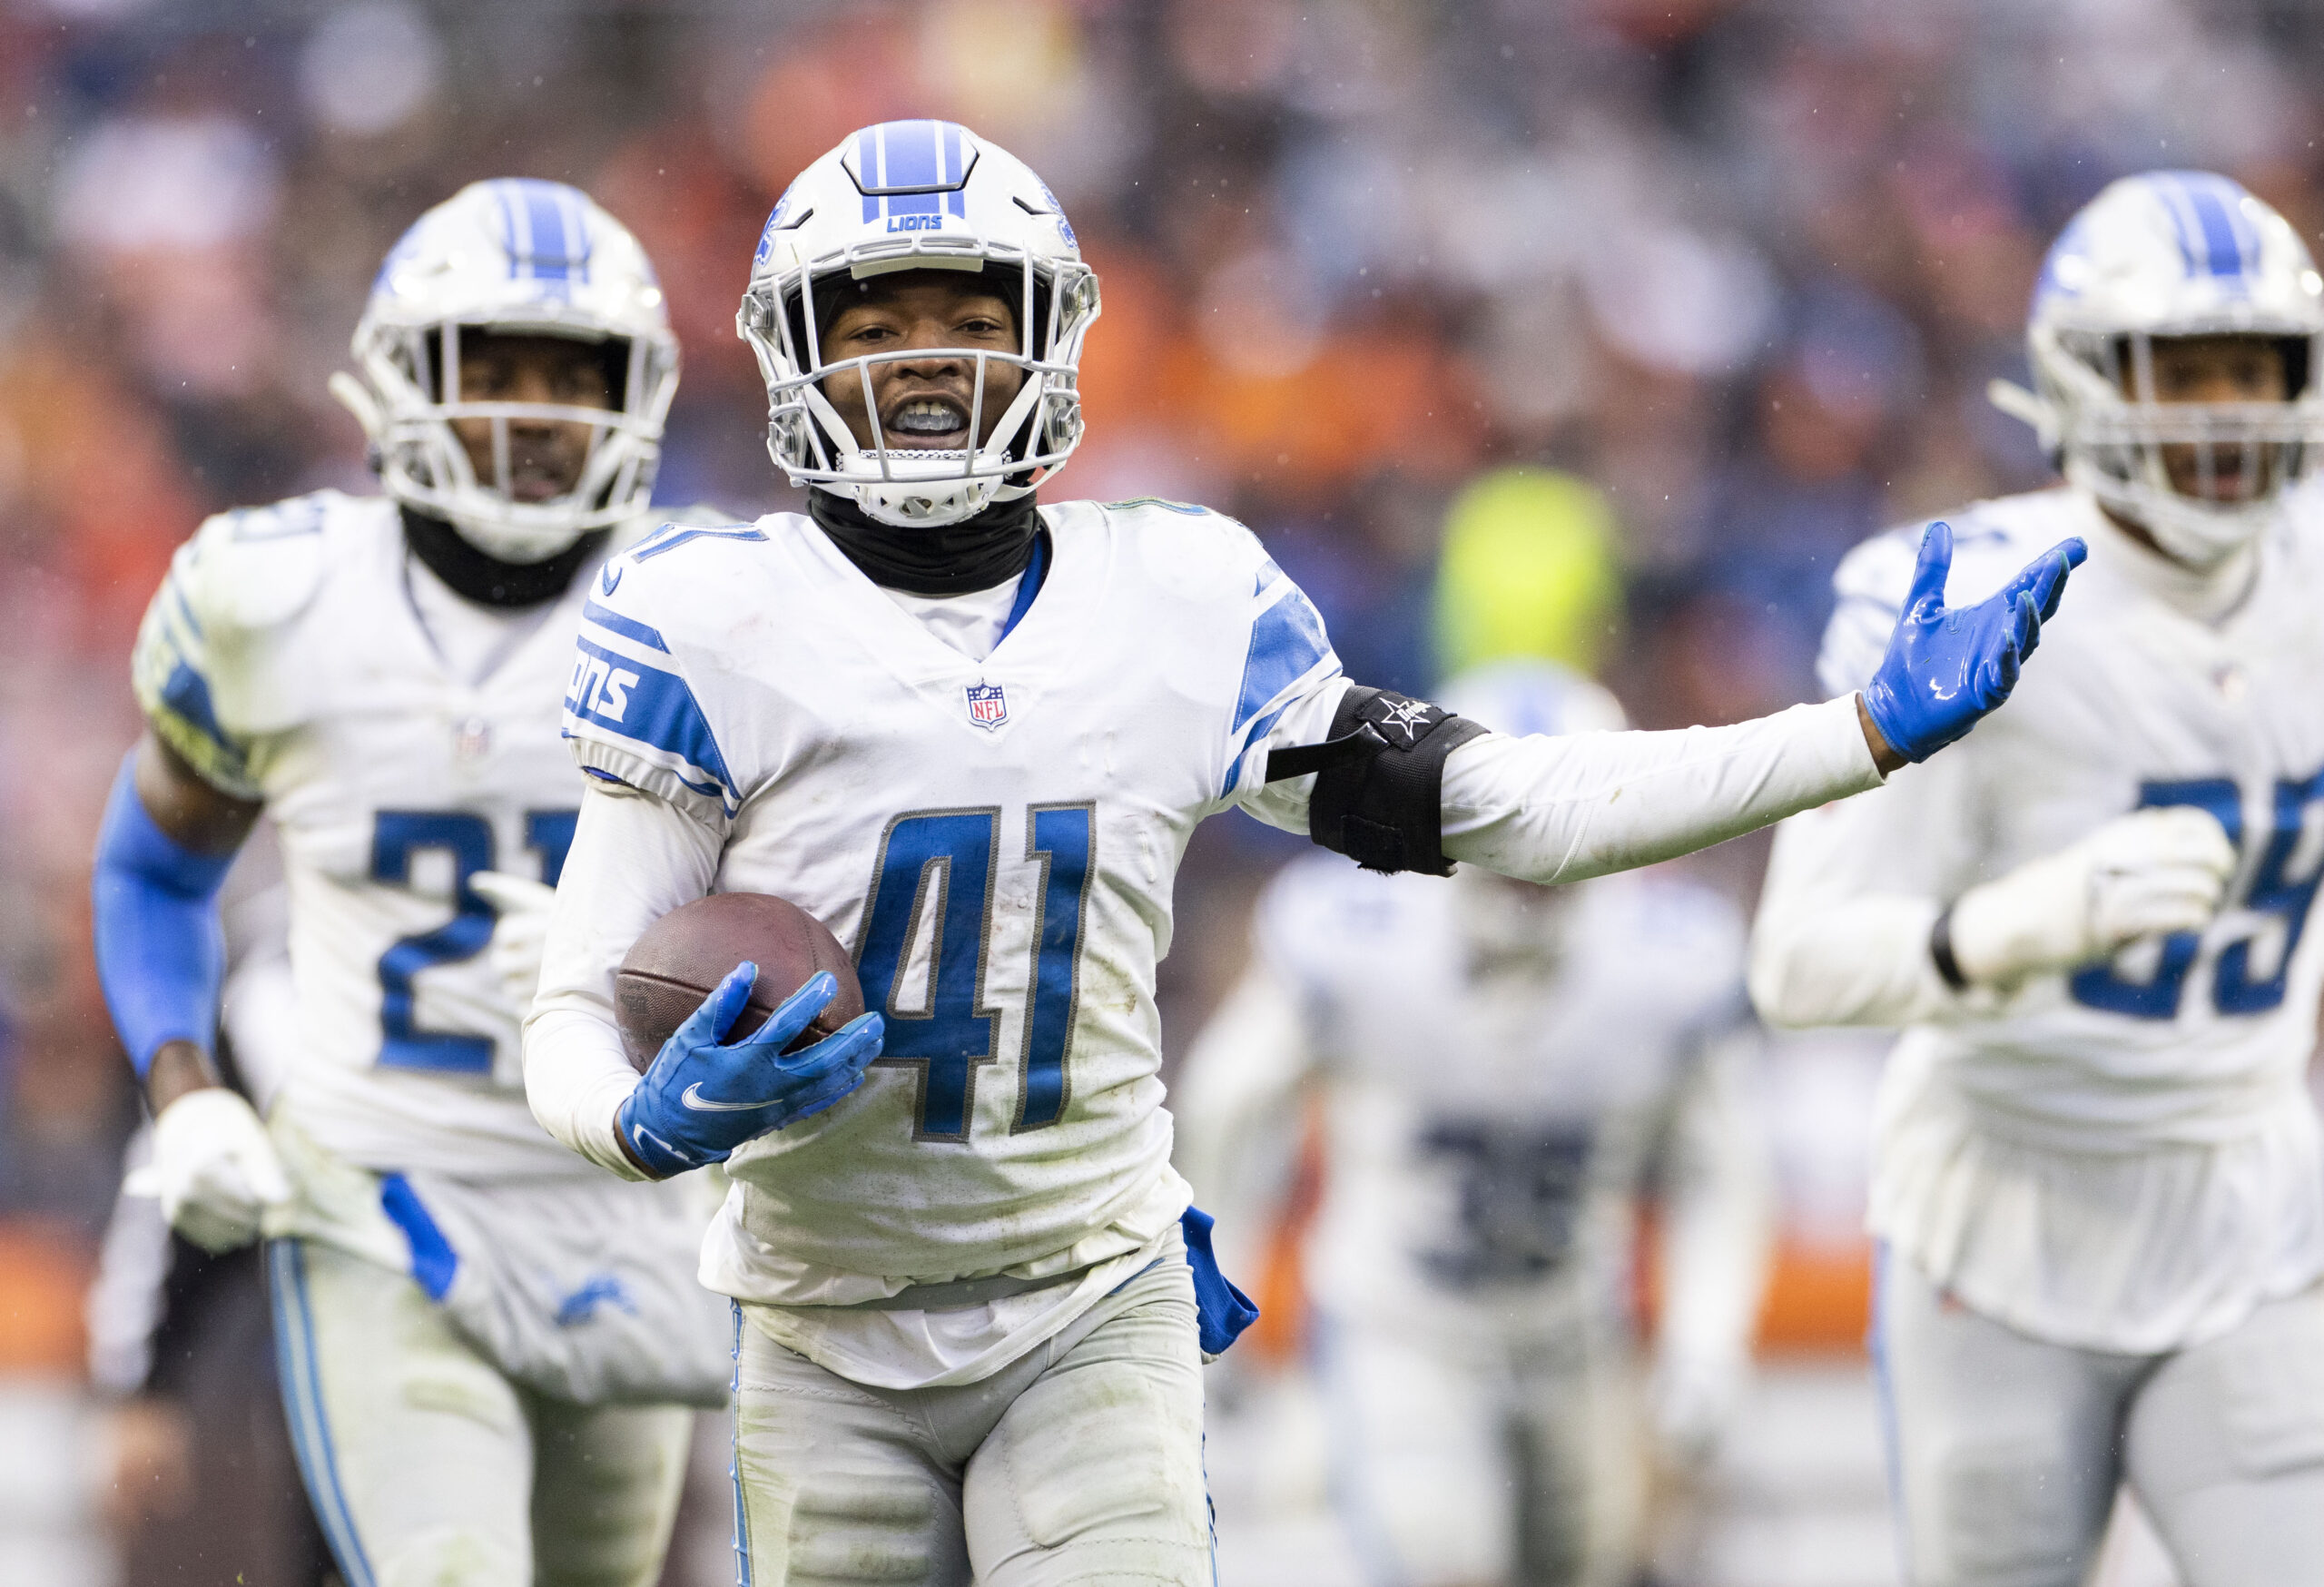 AJ Parker signs back to the Lions practice squad